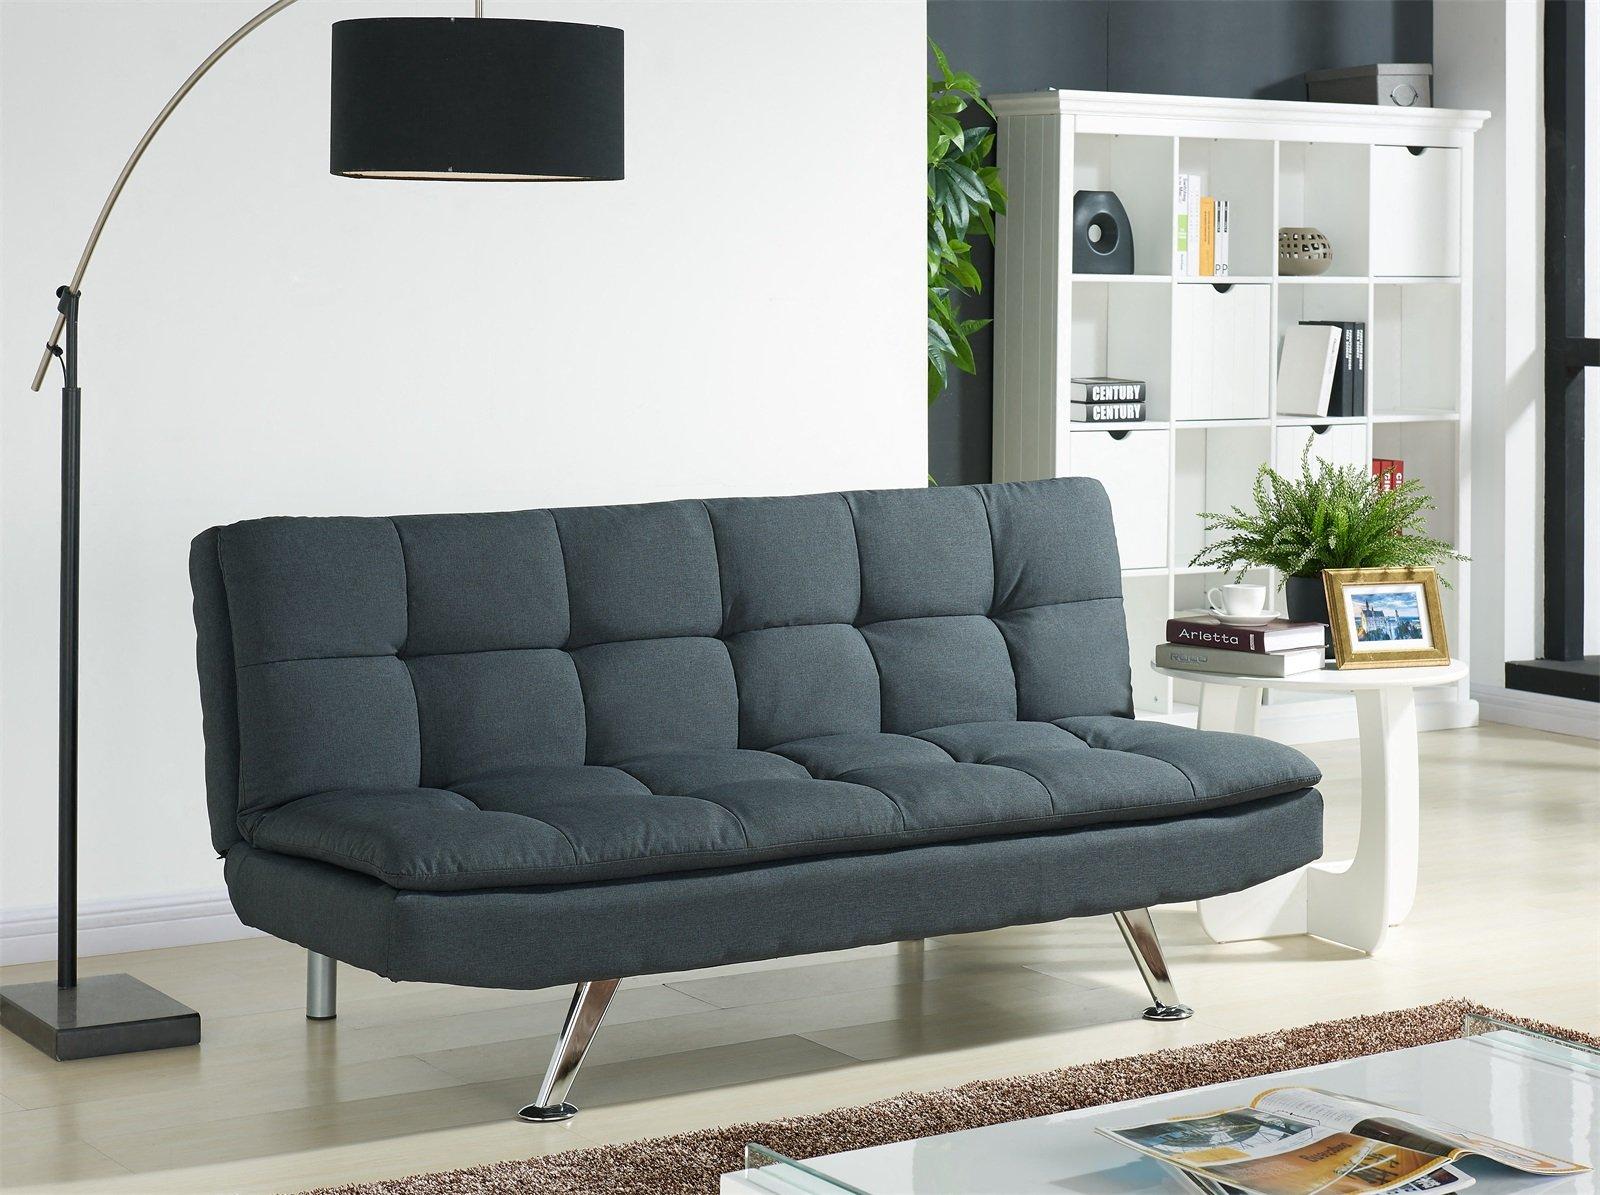 Kingston Fabric Sofa Bed With Tufted Detail and Chrome Legs